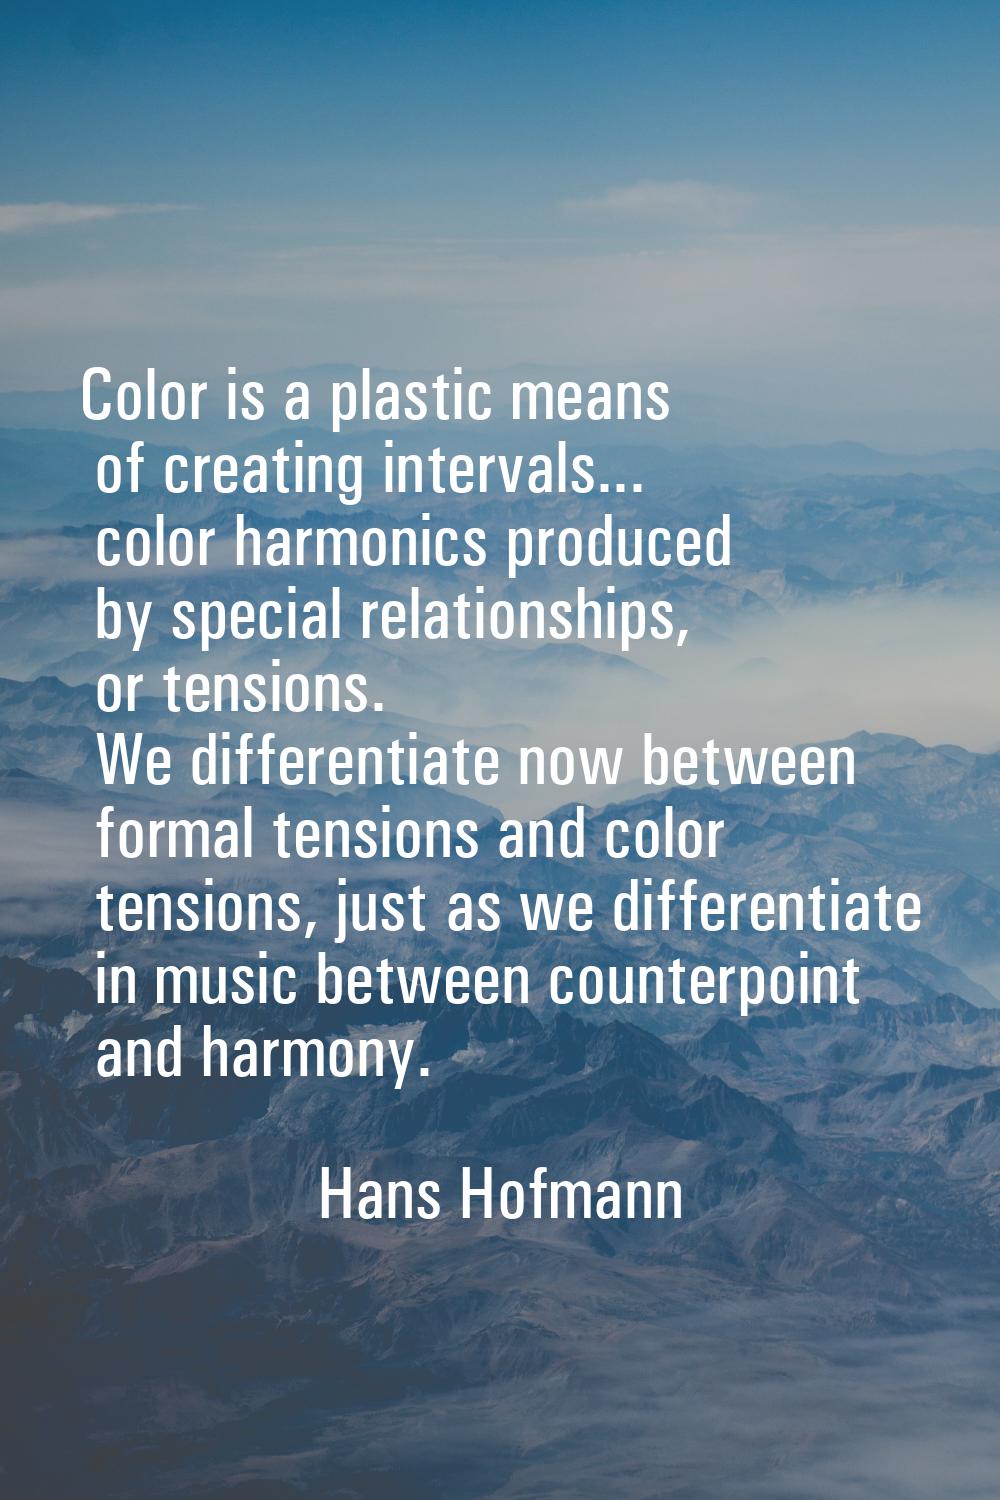 Color is a plastic means of creating intervals... color harmonics produced by special relationships